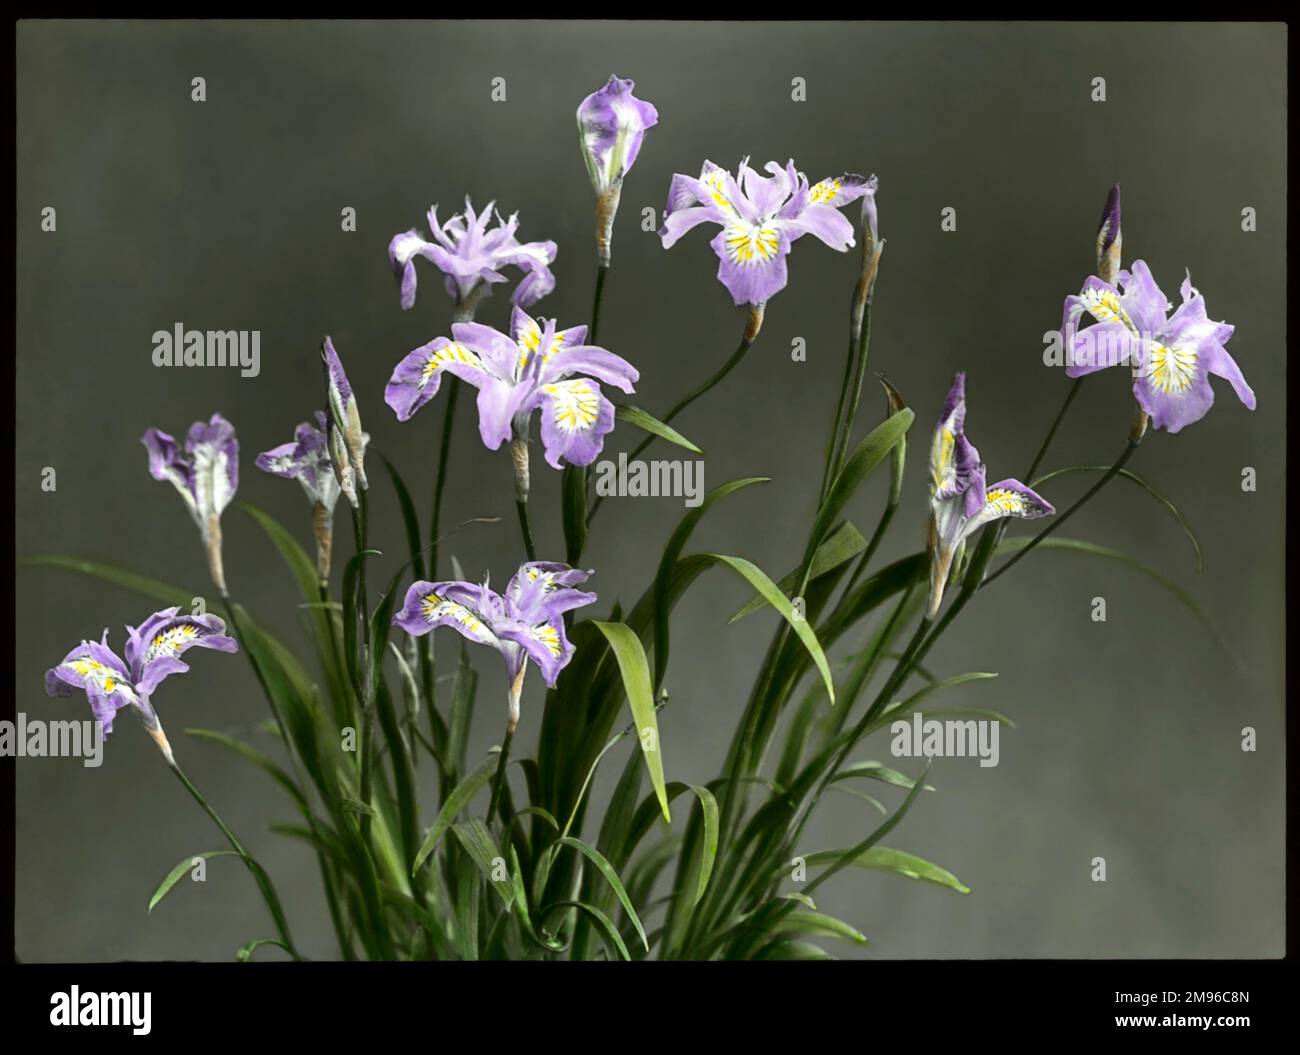 Iris Gracilipes (Crested Iris), a flower of the Iridaceae family, with mauve, yellow and white colouring, native to Japan. Stock Photo